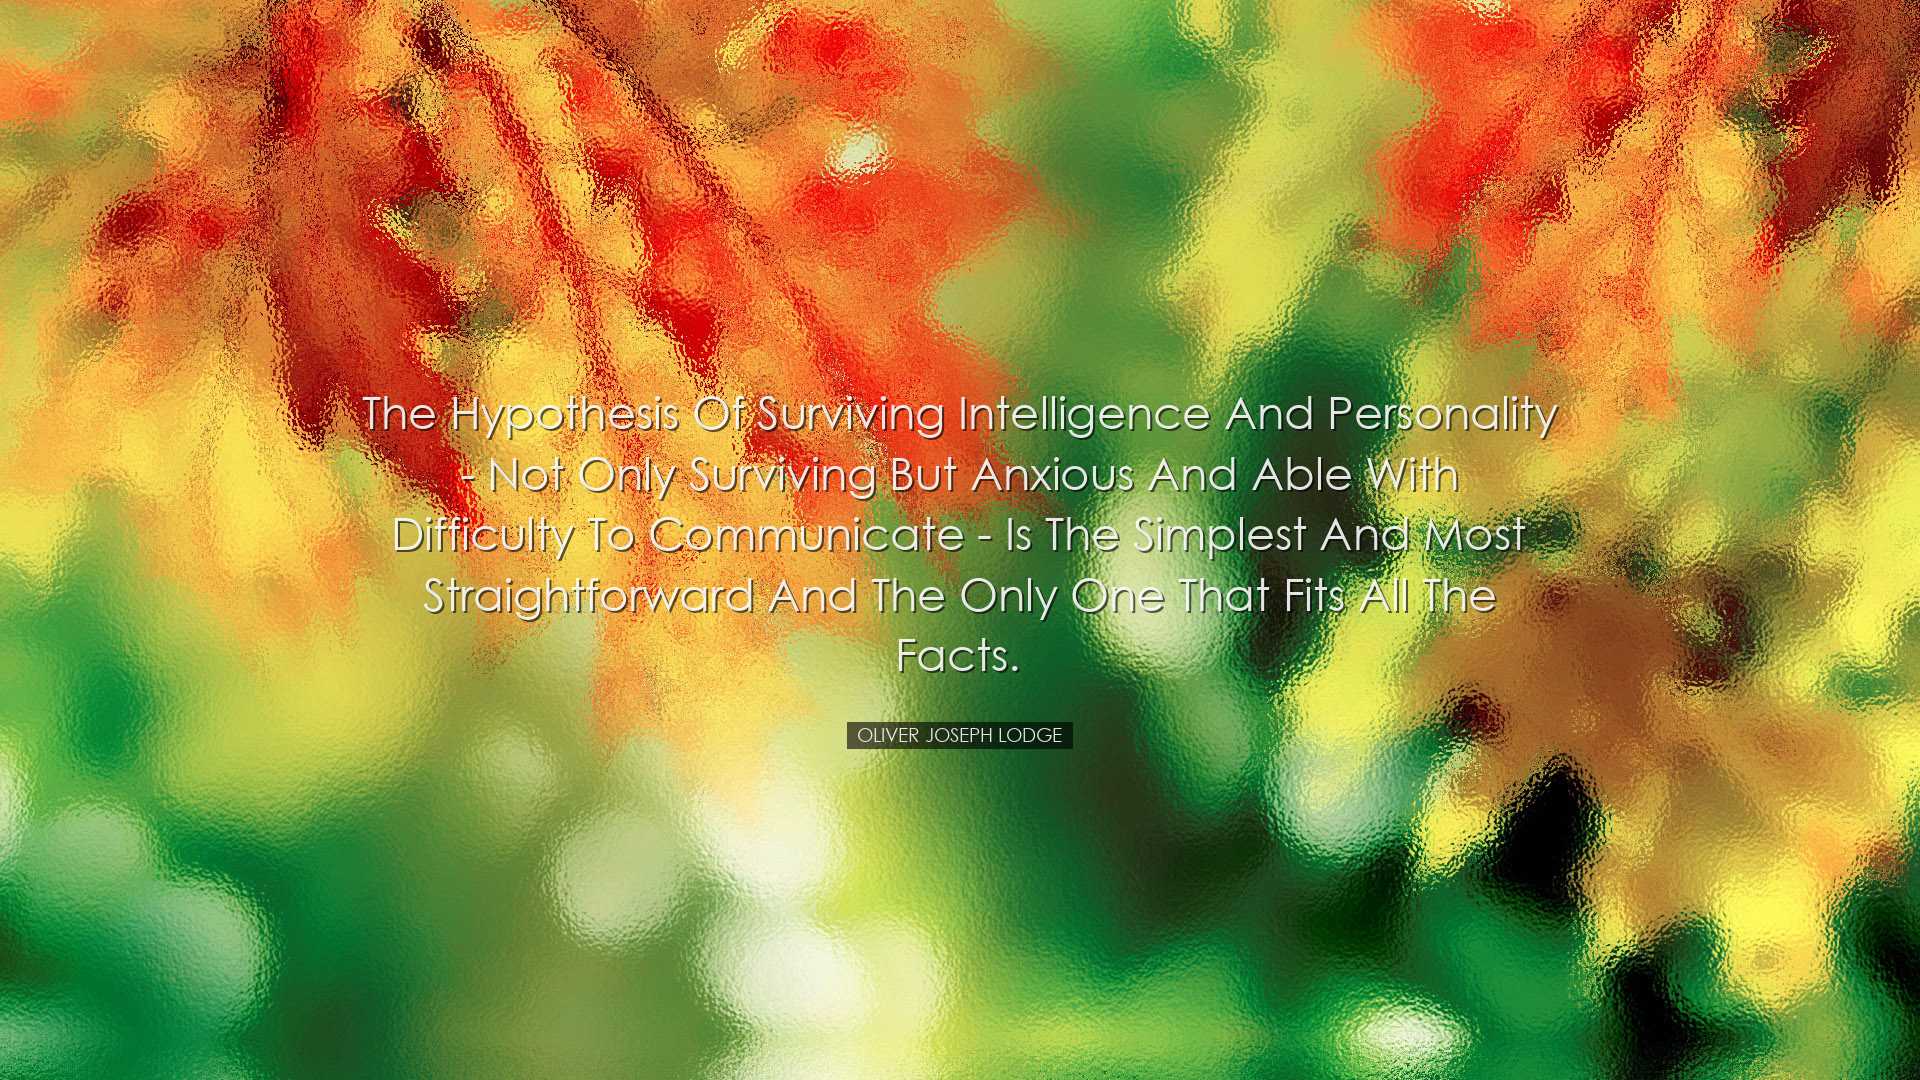 The hypothesis of surviving intelligence and personality - not onl